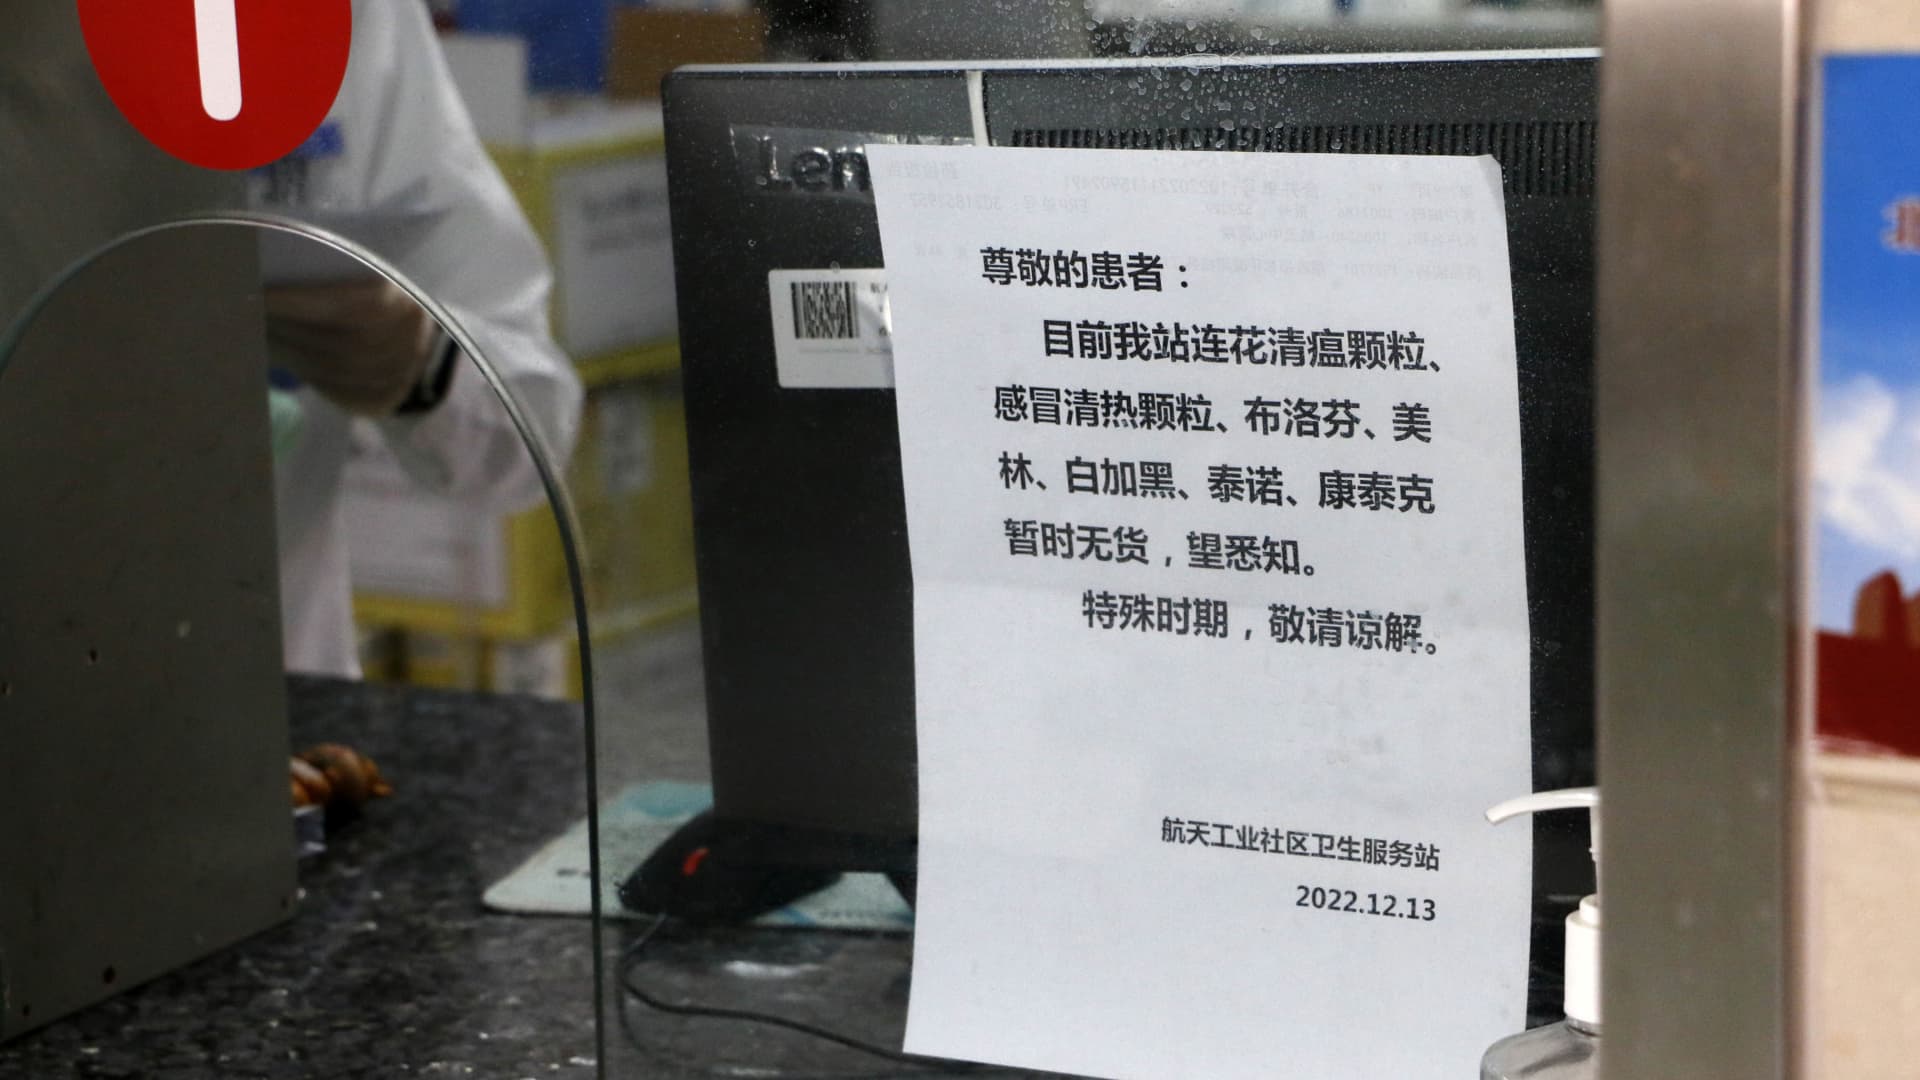 A notice is posted at a community health service station in Beijing, China, December 14, 2022, showing that Chinese patent medicines such as Lianhua Qingwen granules are temporarily out of stock.